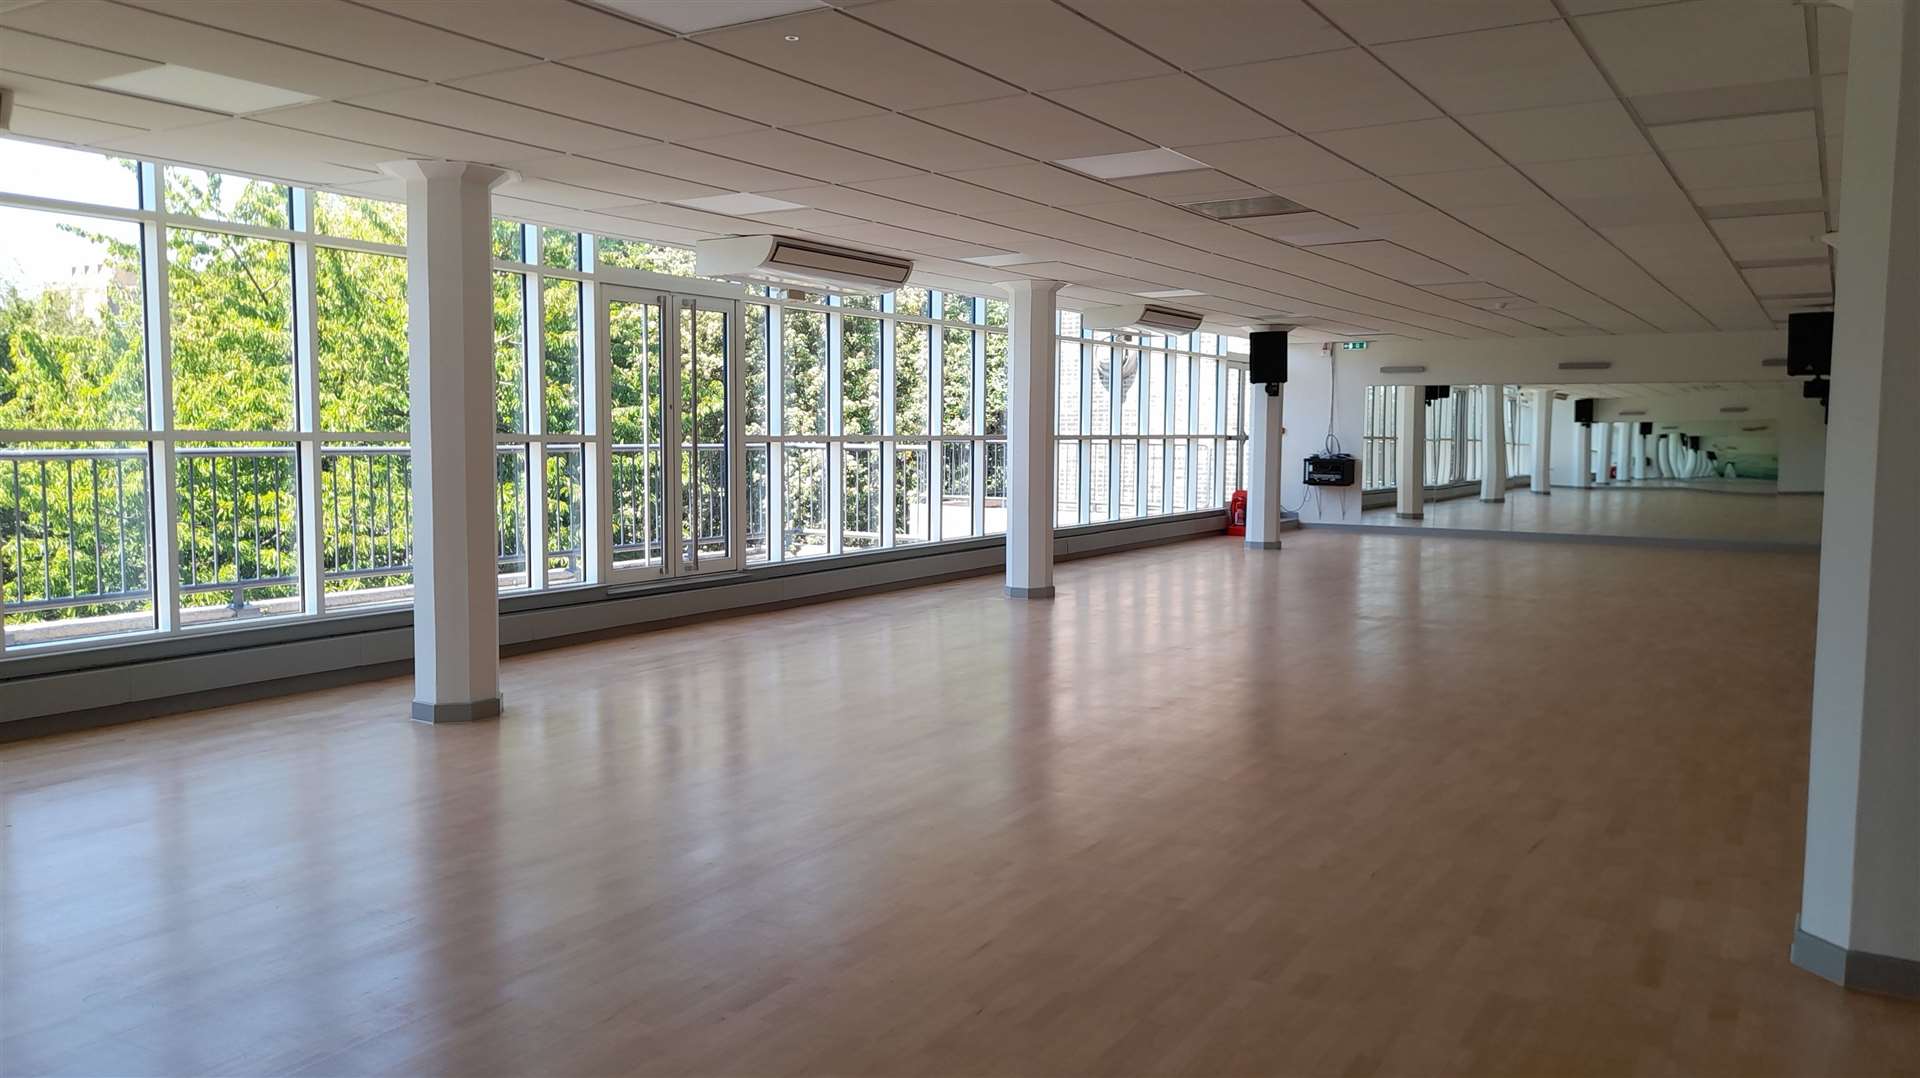 The new studios are incredibly large, and classes are already taking place in them